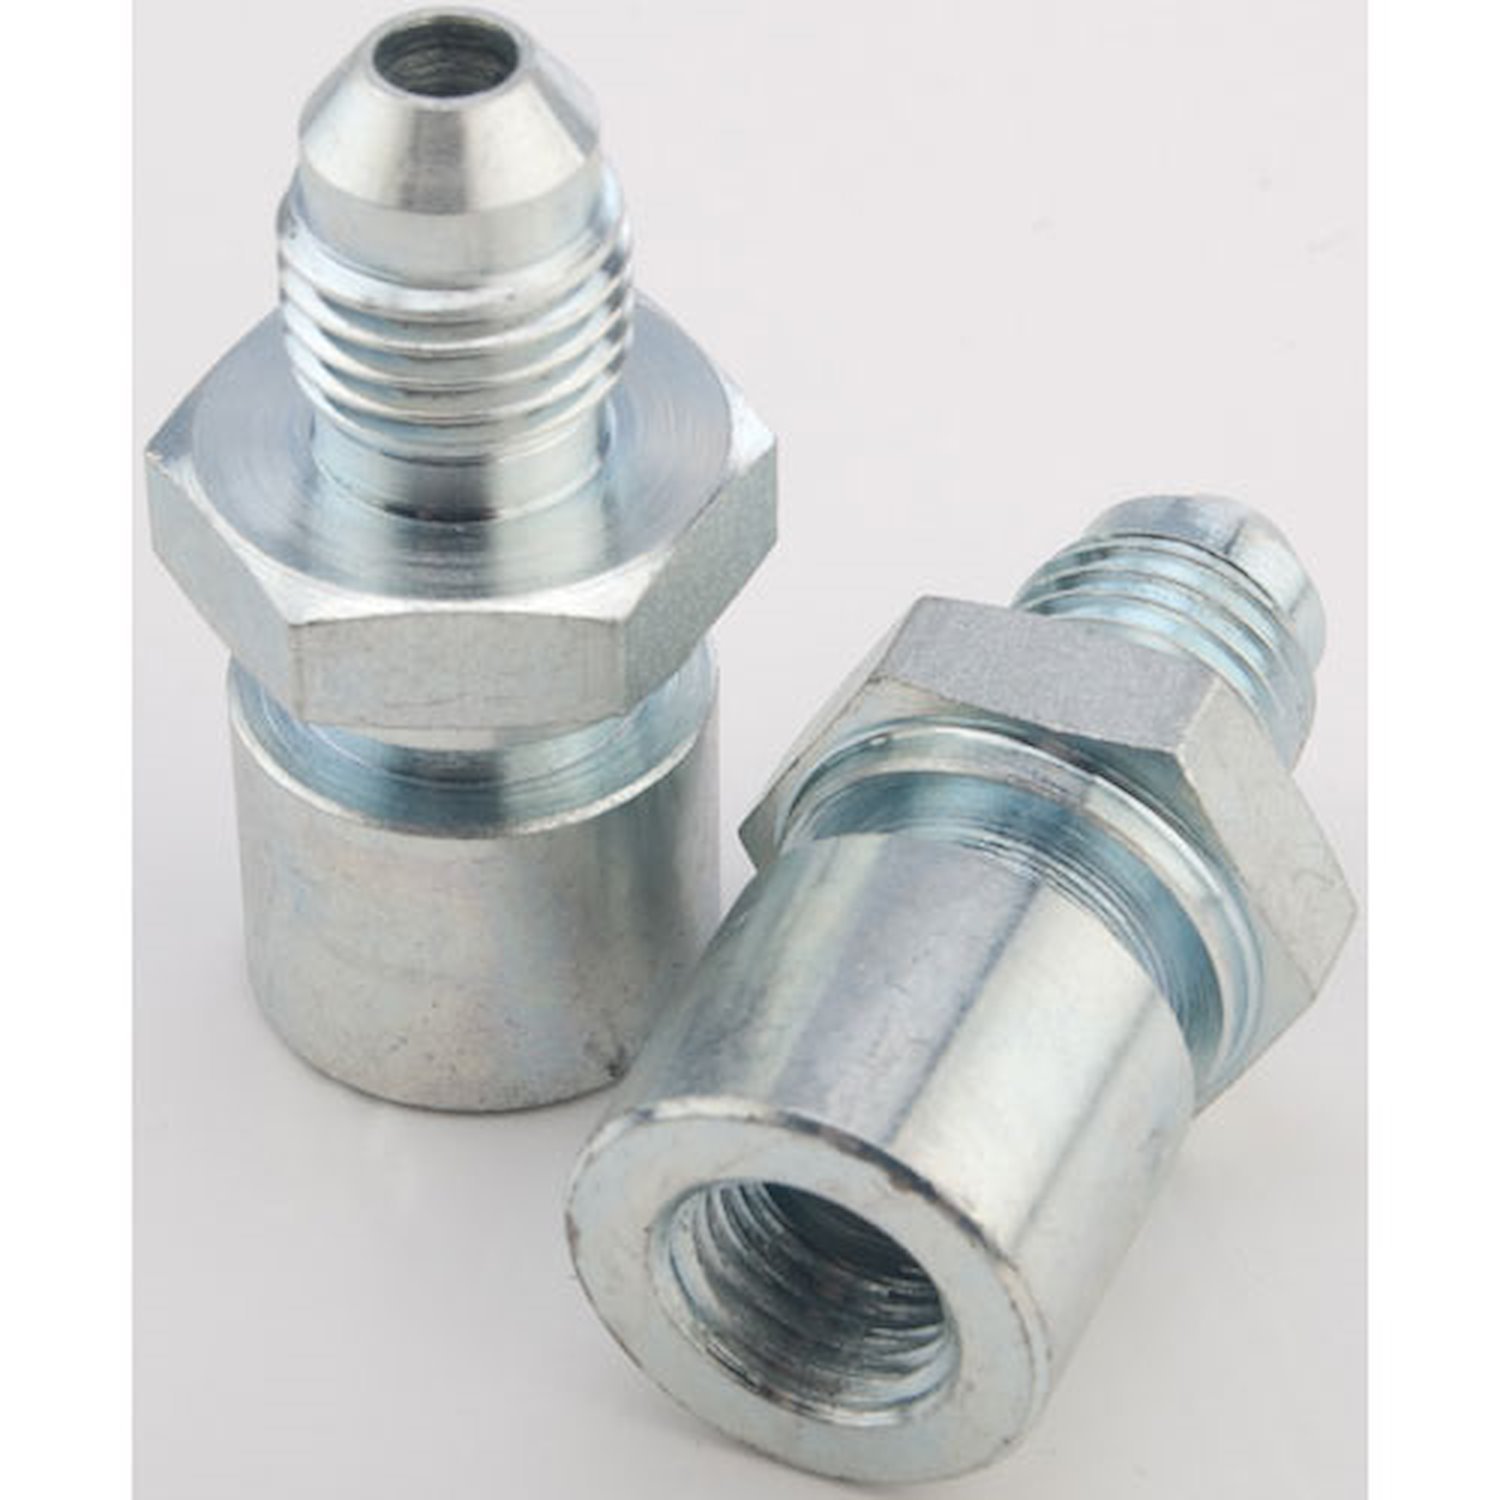 AN to Inverted Flare Female Tube Adapter Fittings